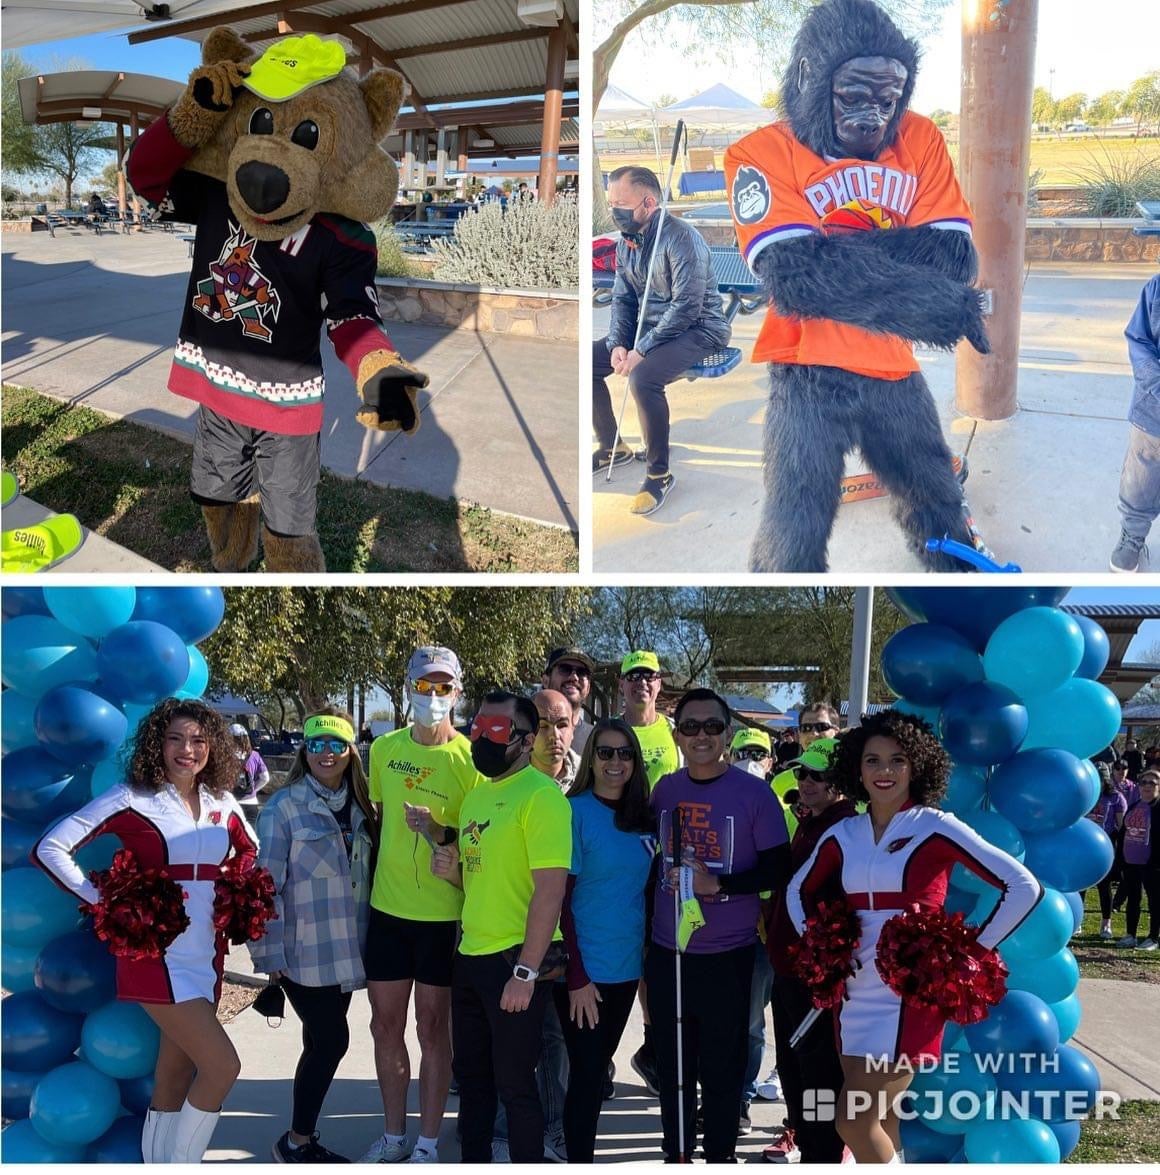 Three picture collage with the top left featuring the AZ Coyotes' mascot and the top right the Suns' Gorilla. On the bottom is pictured a group of people getting ready to start a 5K walk.